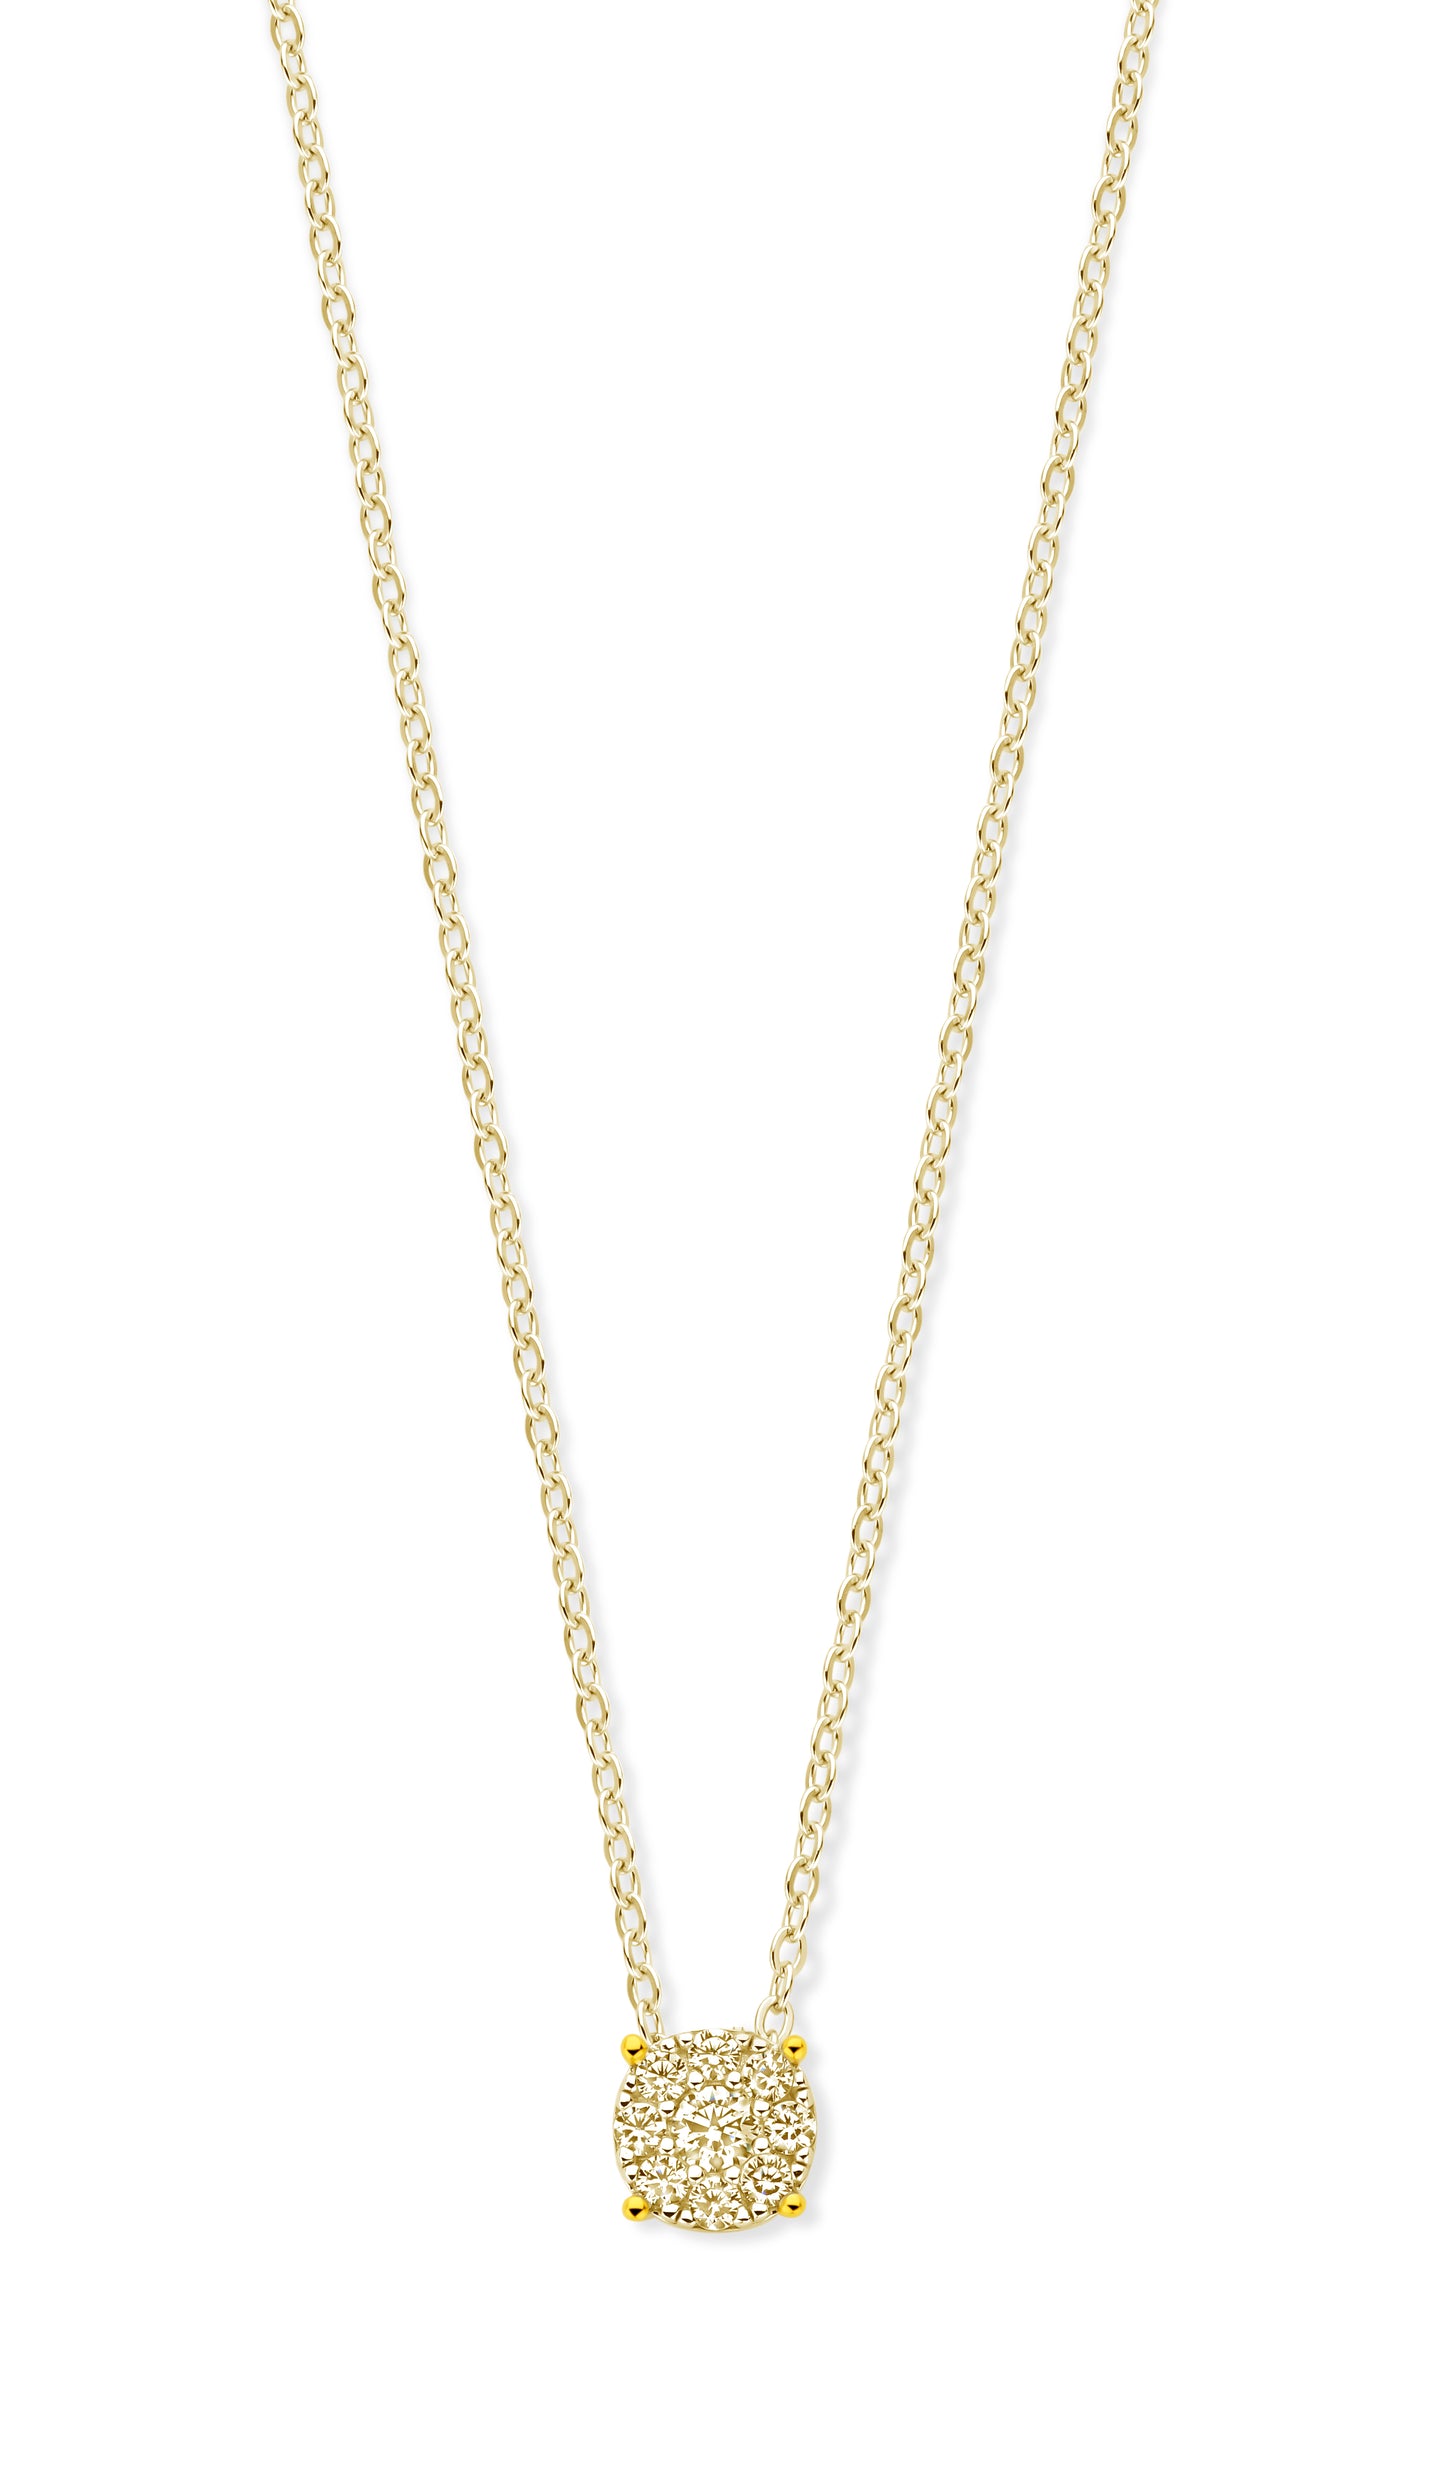 Small Pave Solitare Necklace